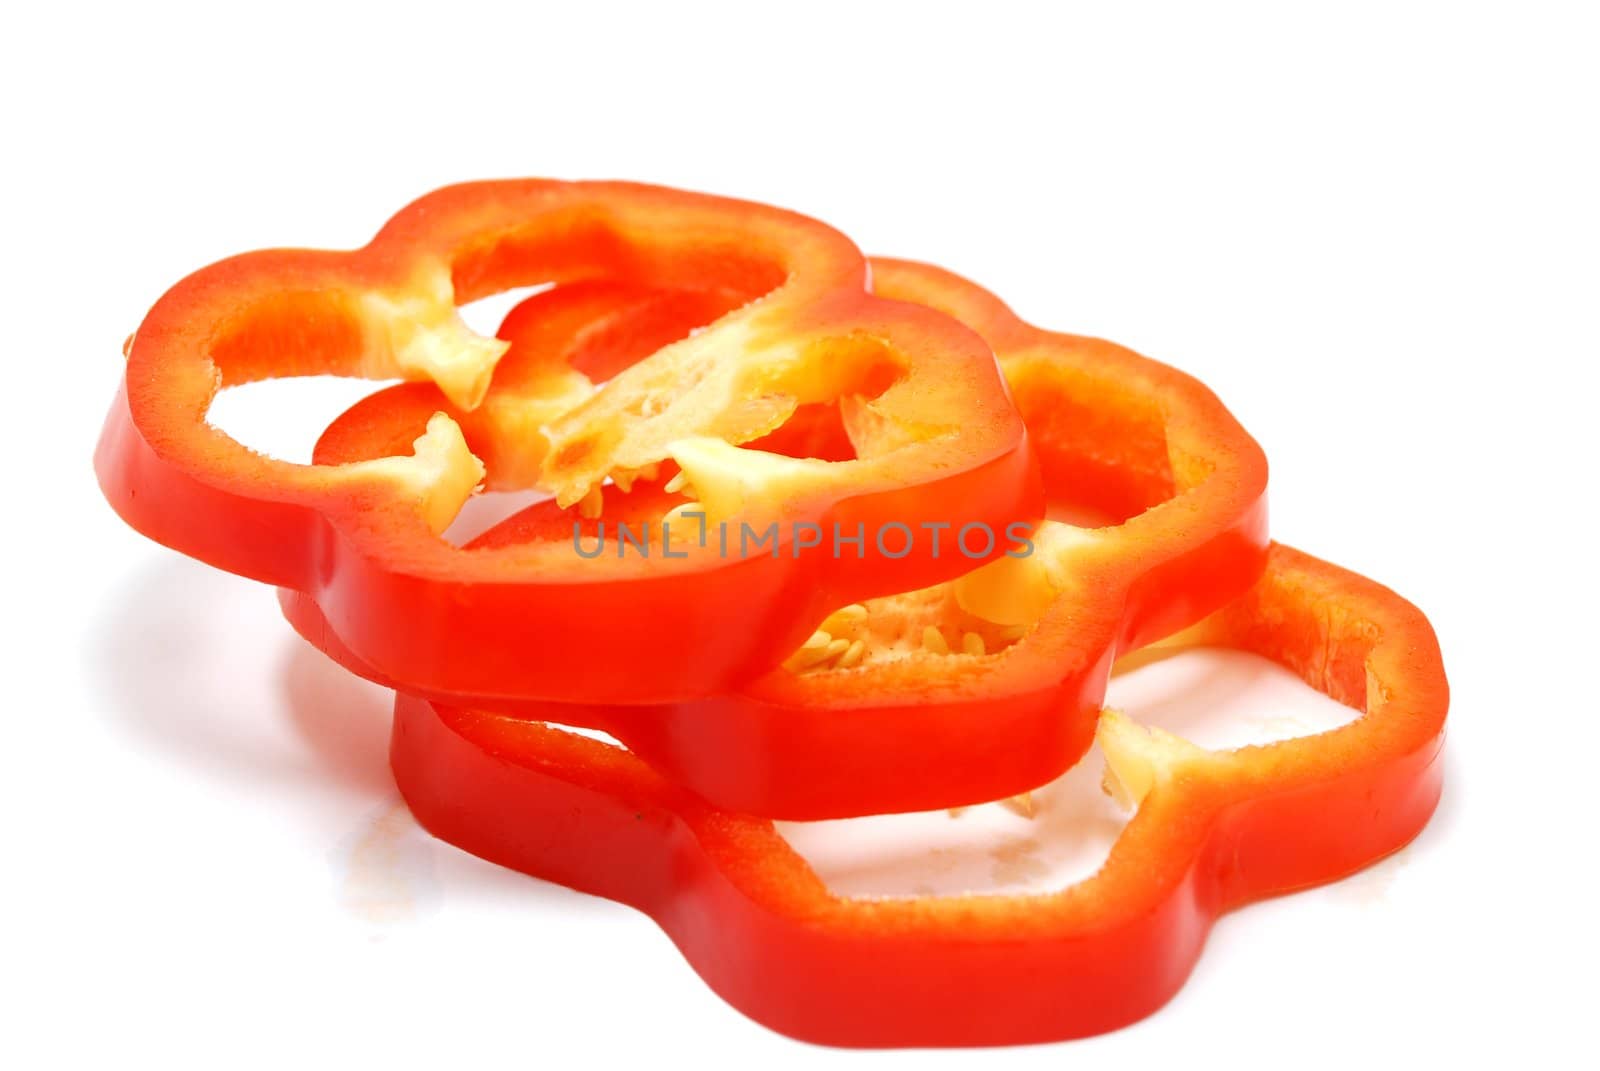 Isolated Sliced Red Pepper on White Background